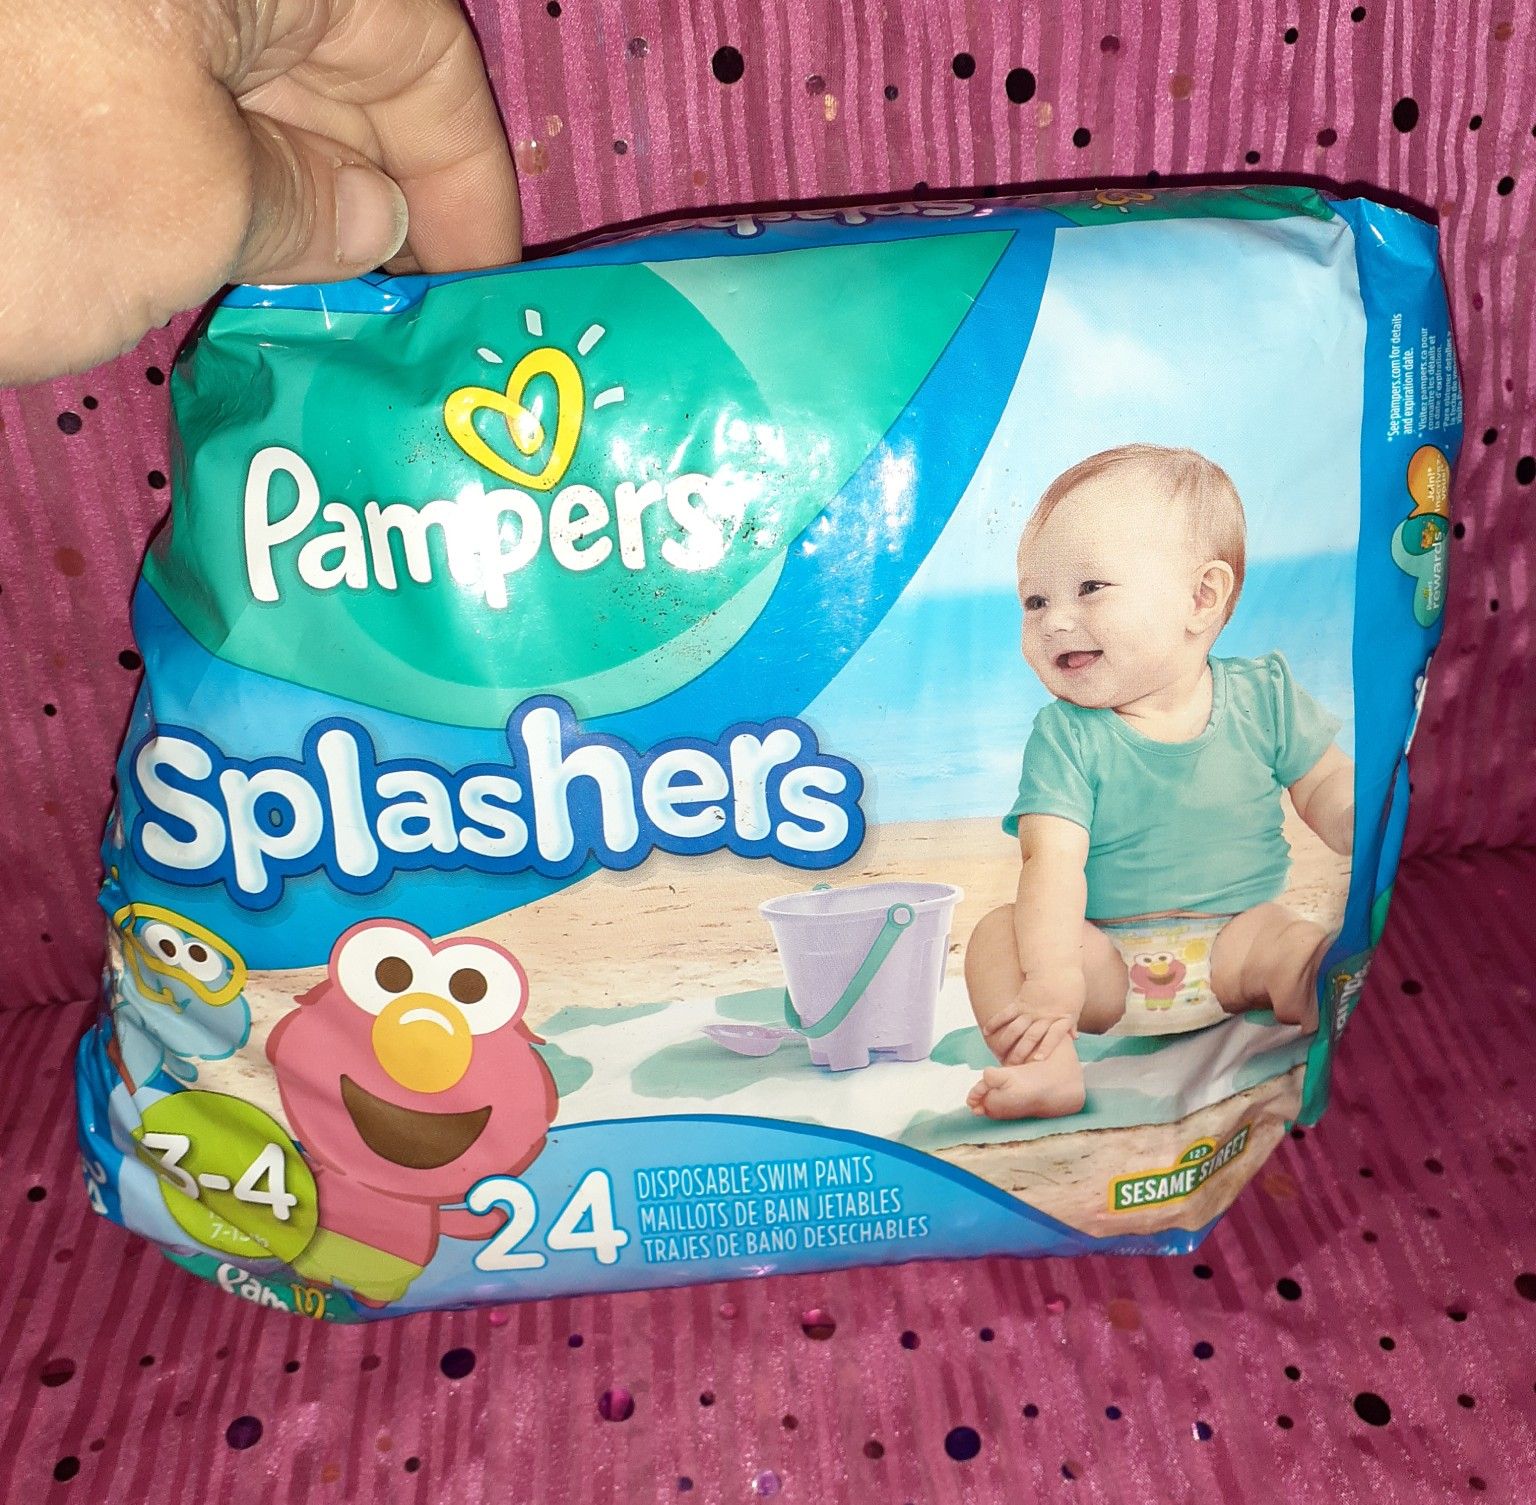 20 Splashers Pampers Diapers Size 3-4